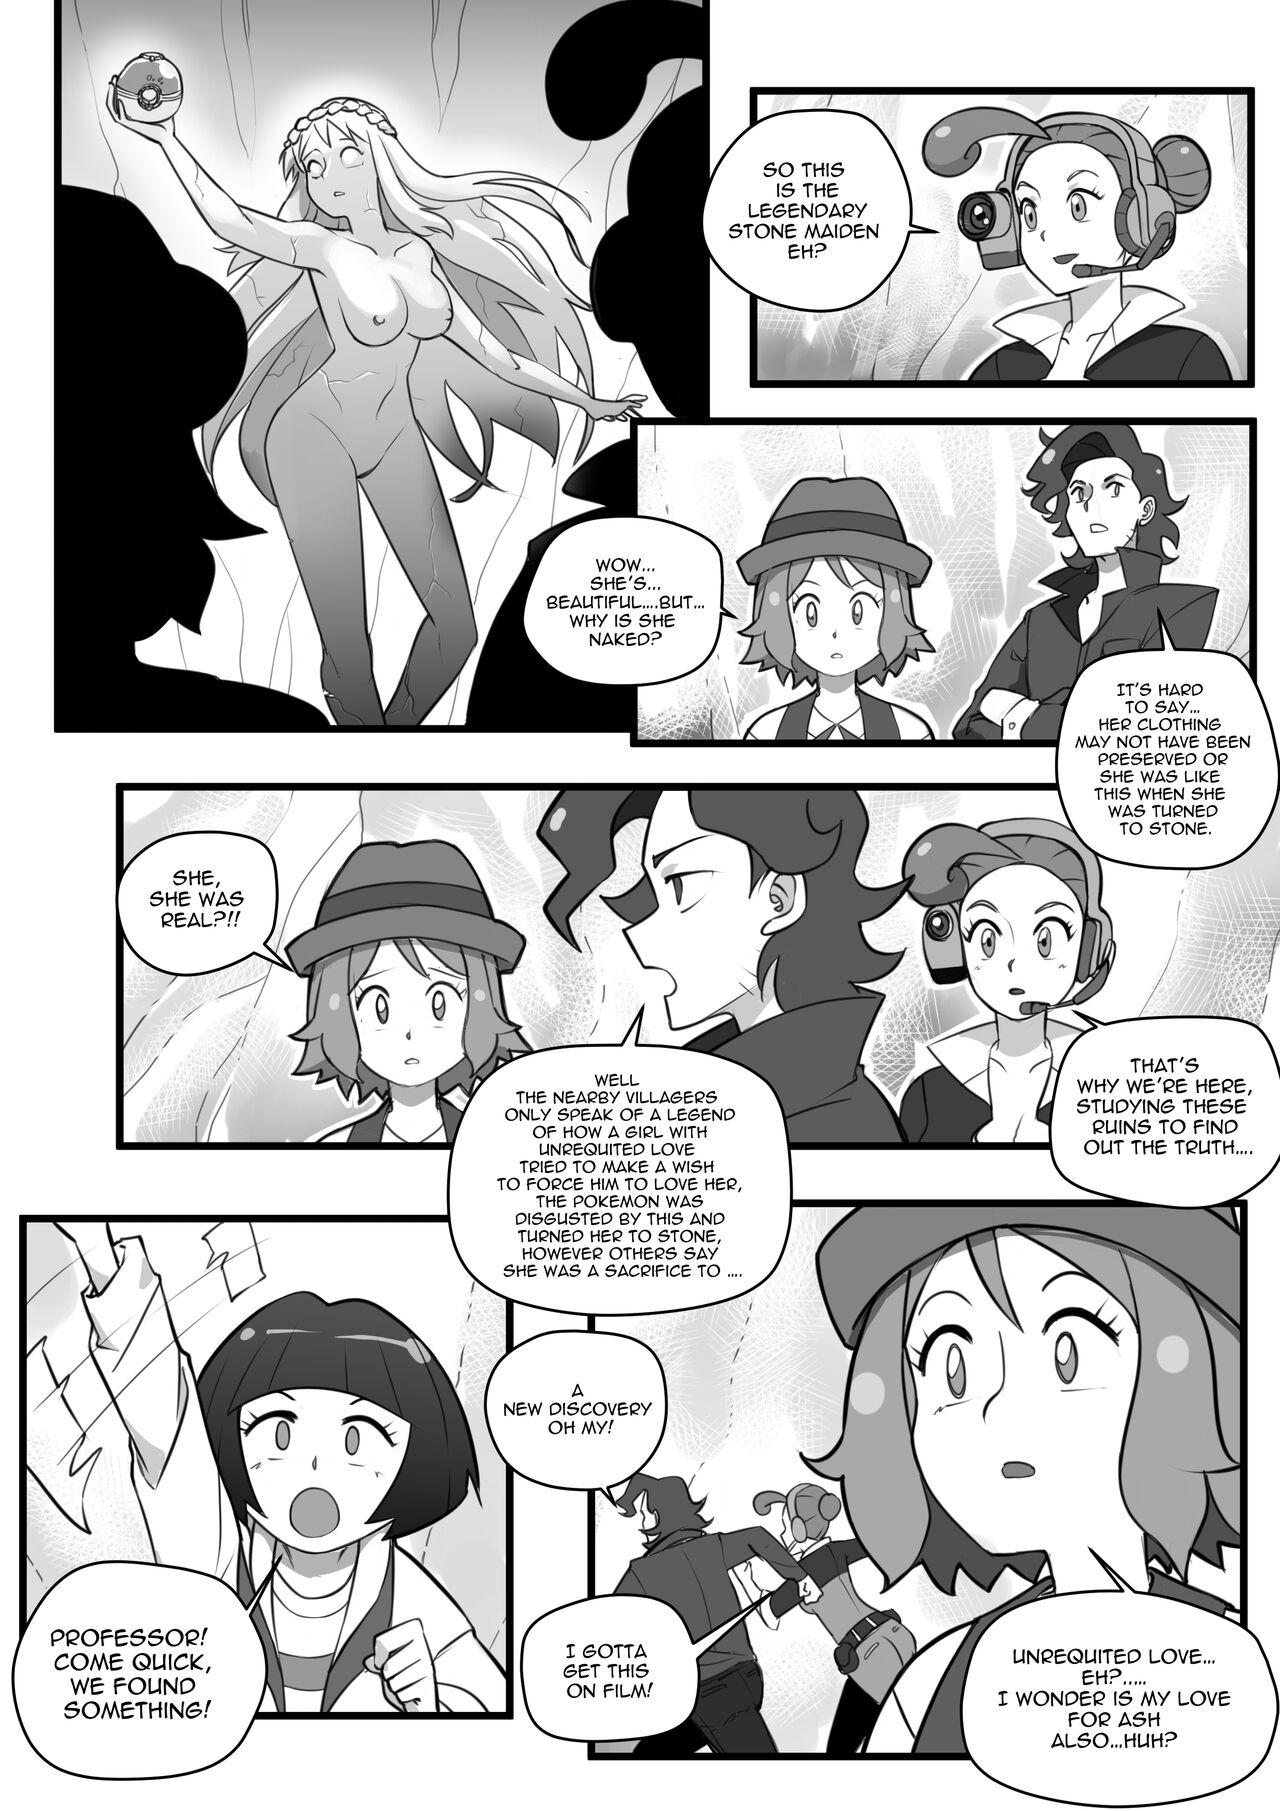 Office Serena: A Petrified Sacrifice though time! - Pokemon | pocket monsters Daddy - Page 1